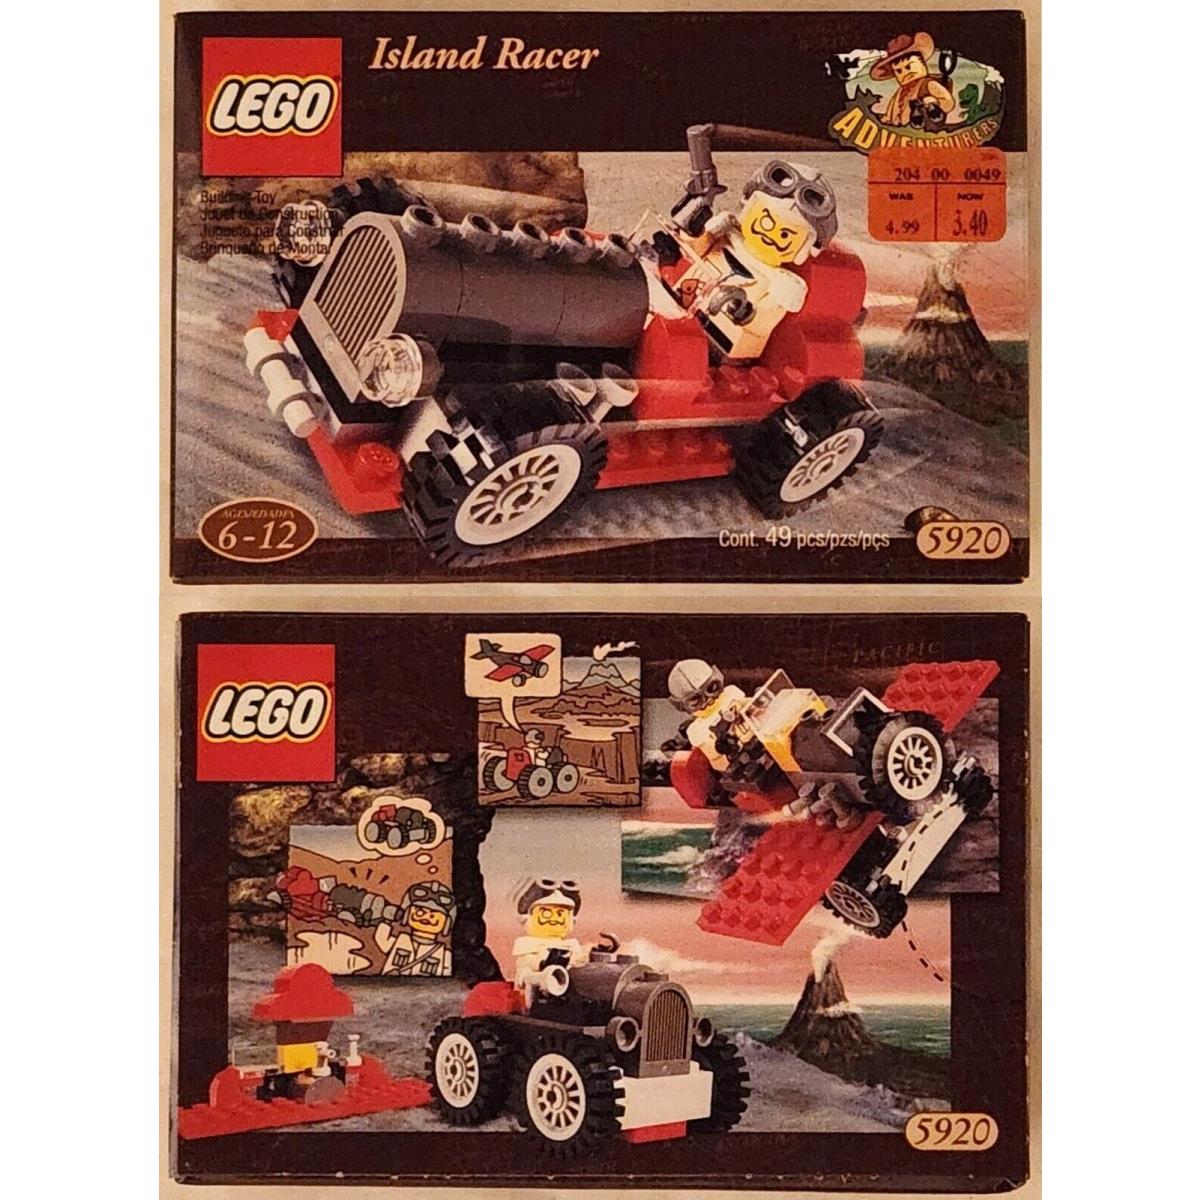 Lego 5920 Island Racer - IN Factory Box - Retired